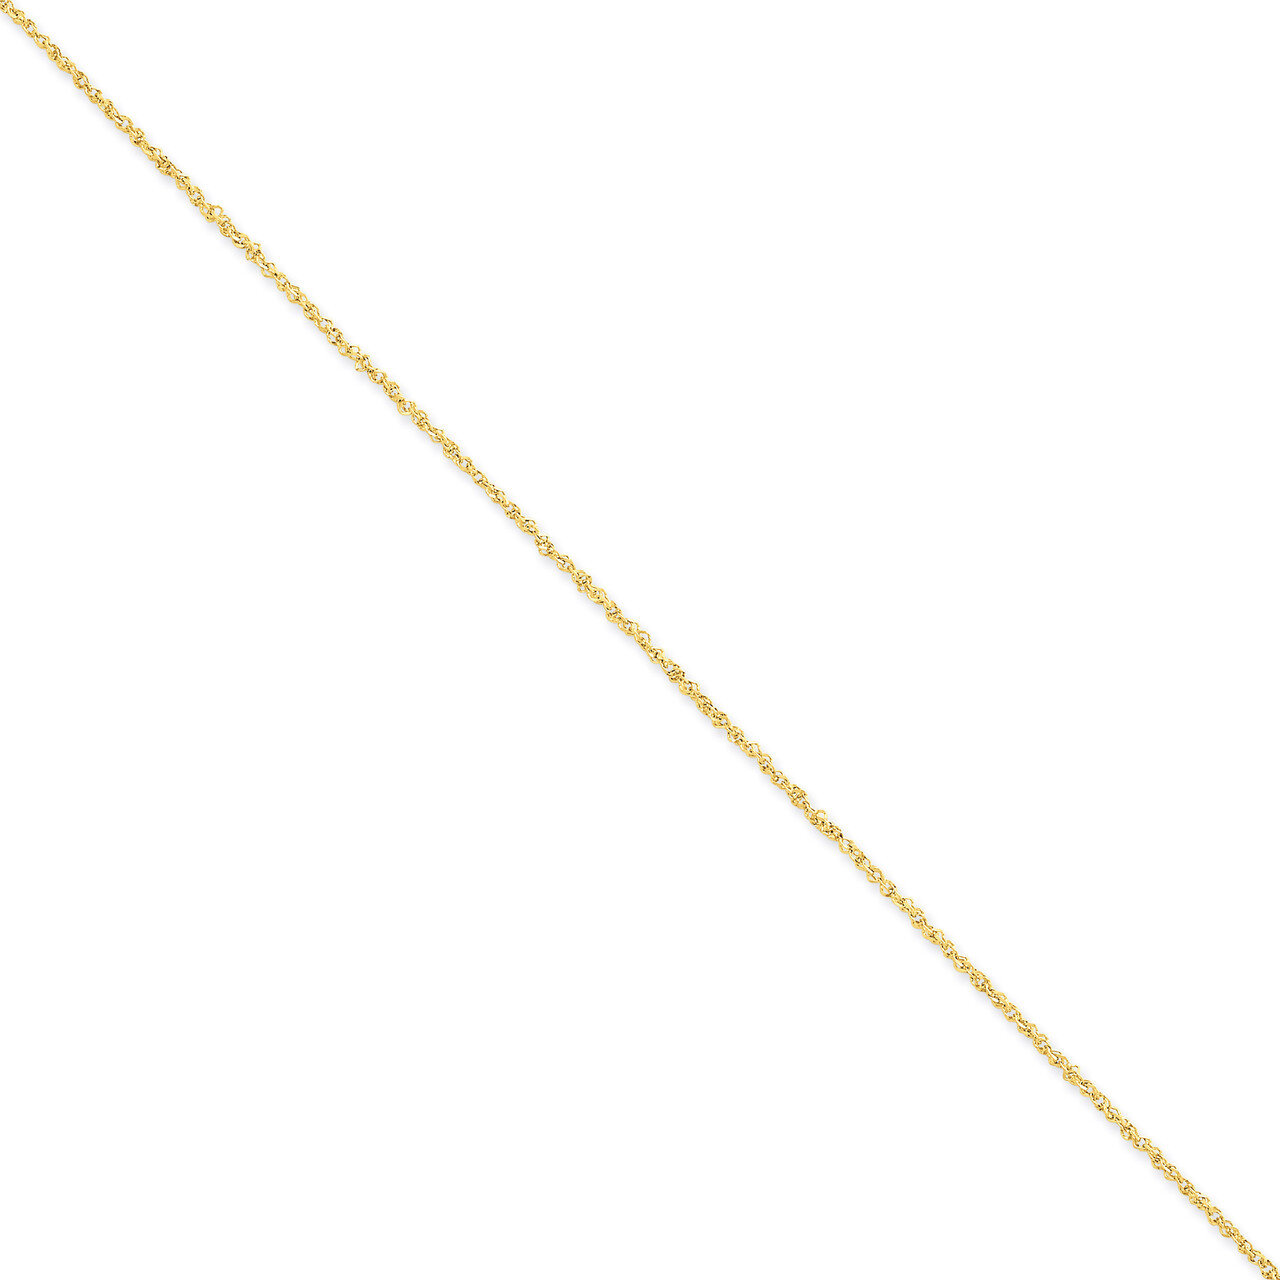 1.7mm Ropa Chain 16 Inch 14k Gold RPA028-16